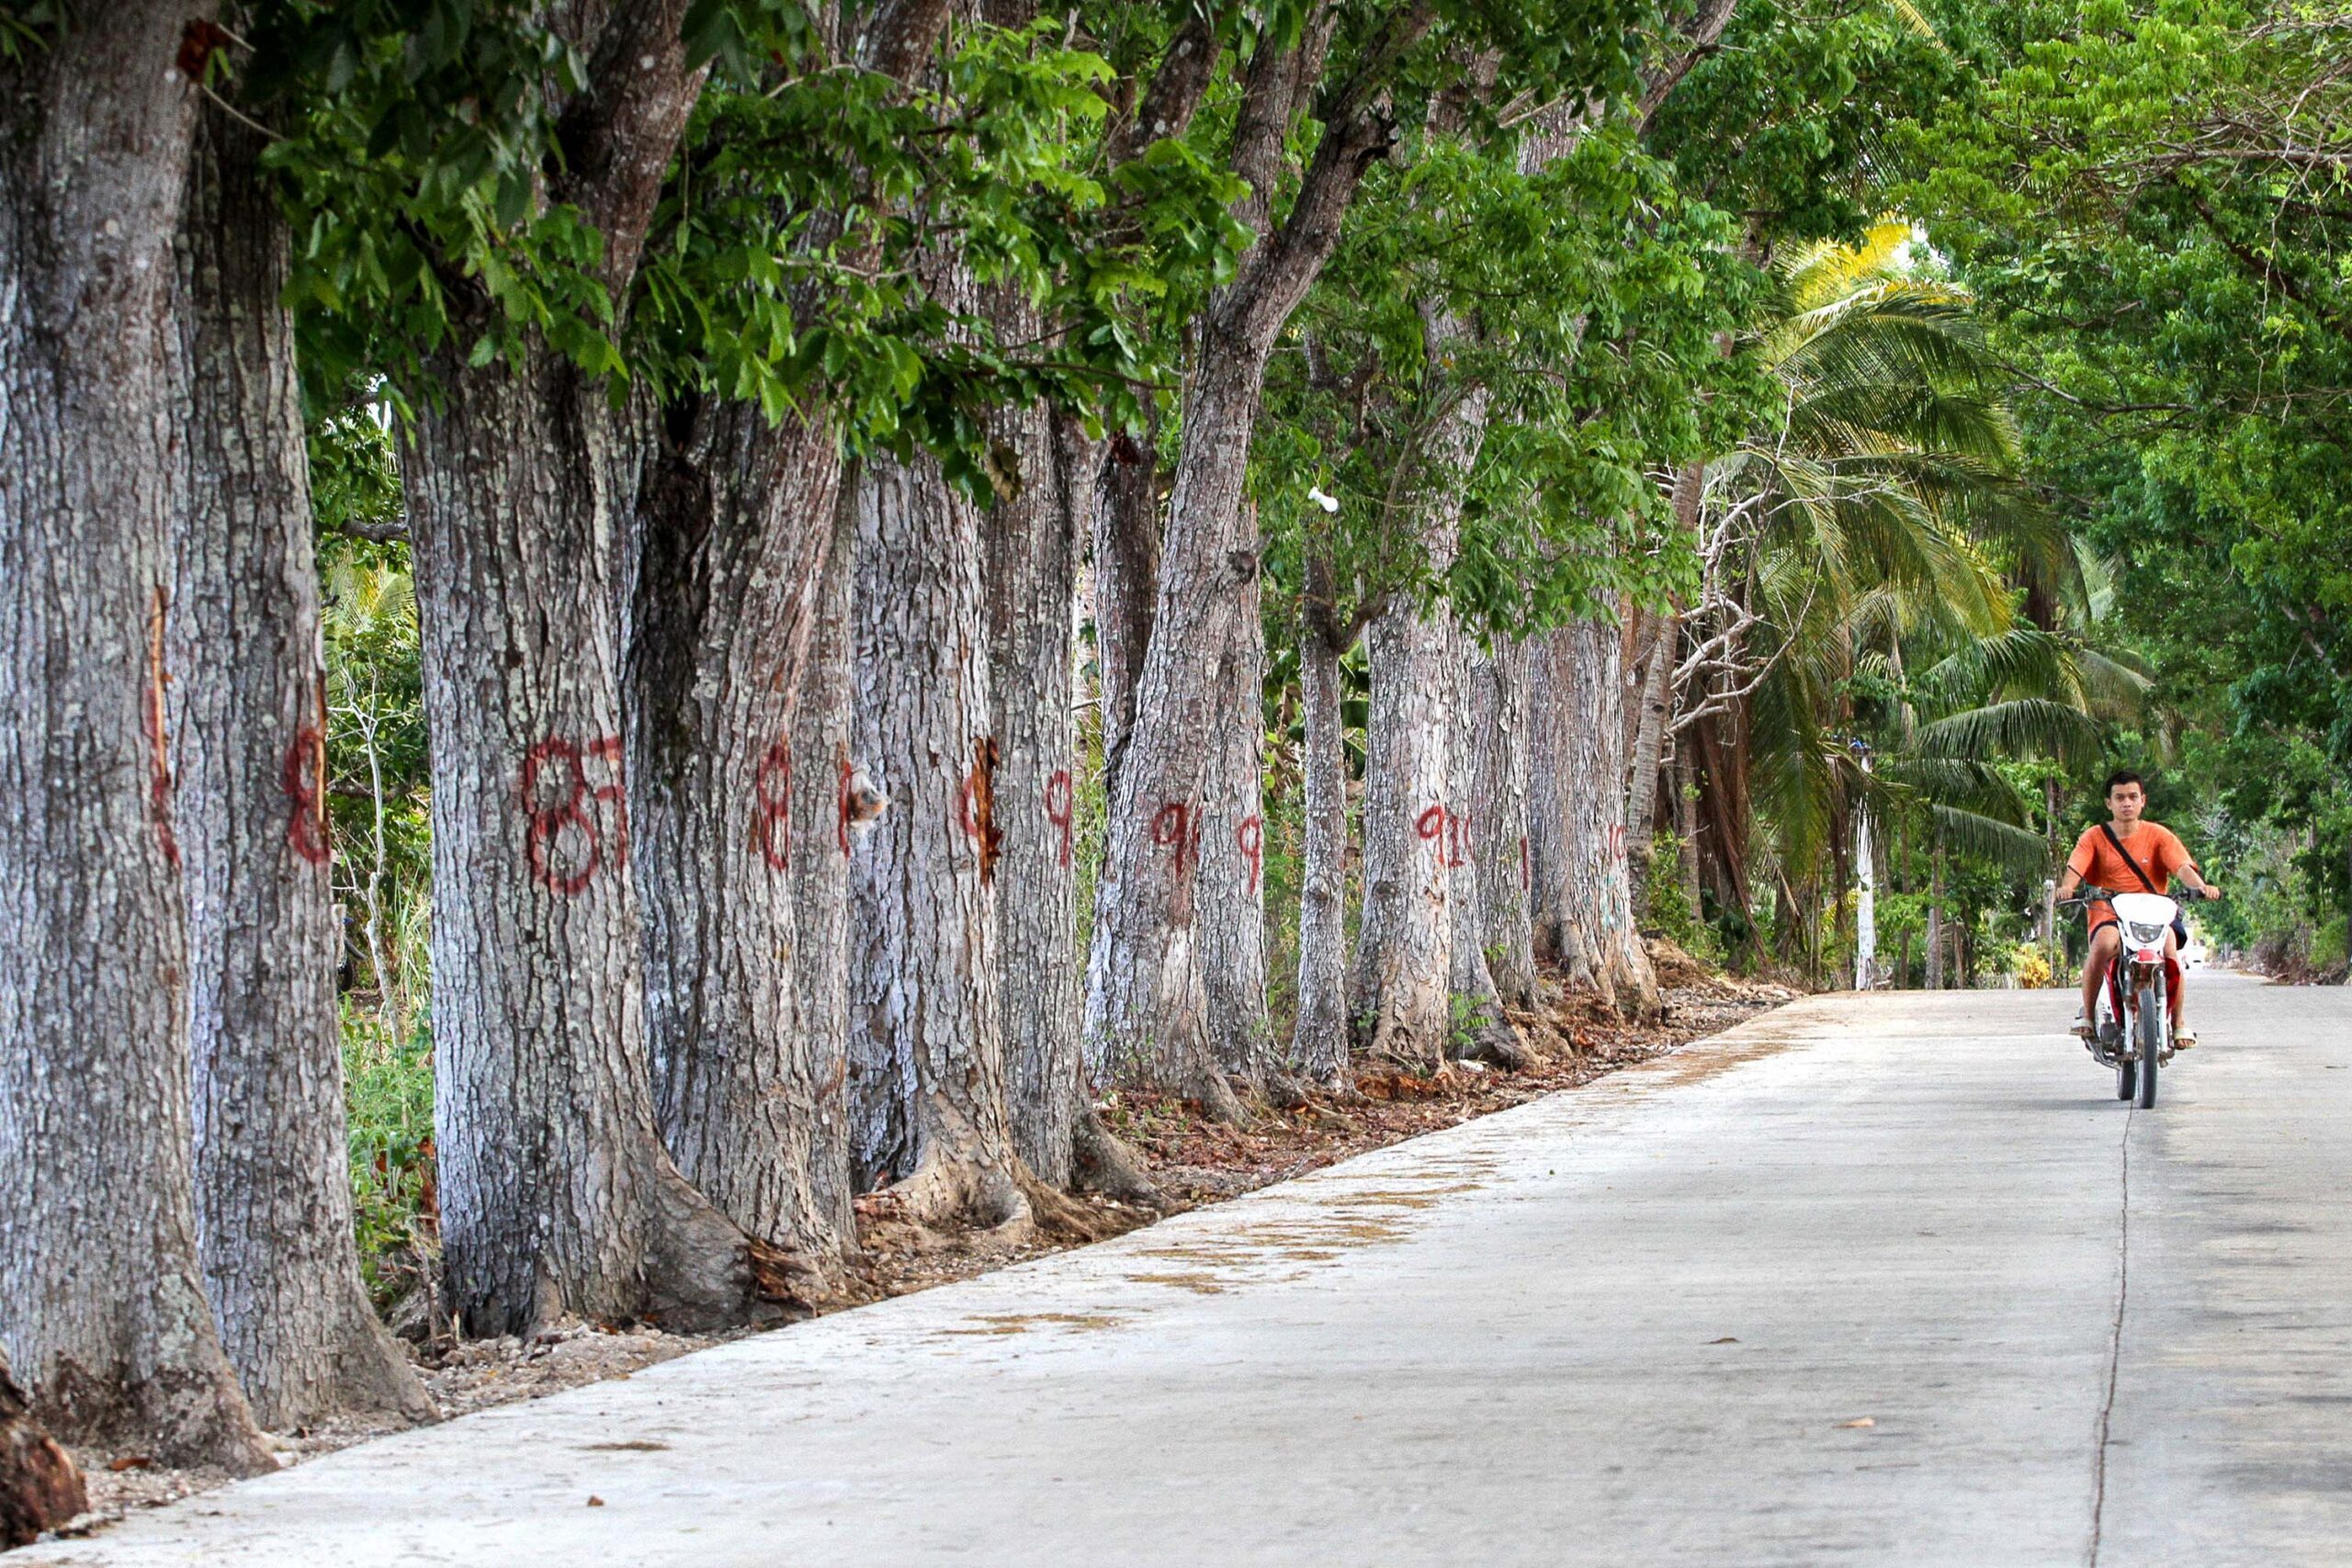 Cebu parish calls for protection of 700 trees amid road widening project